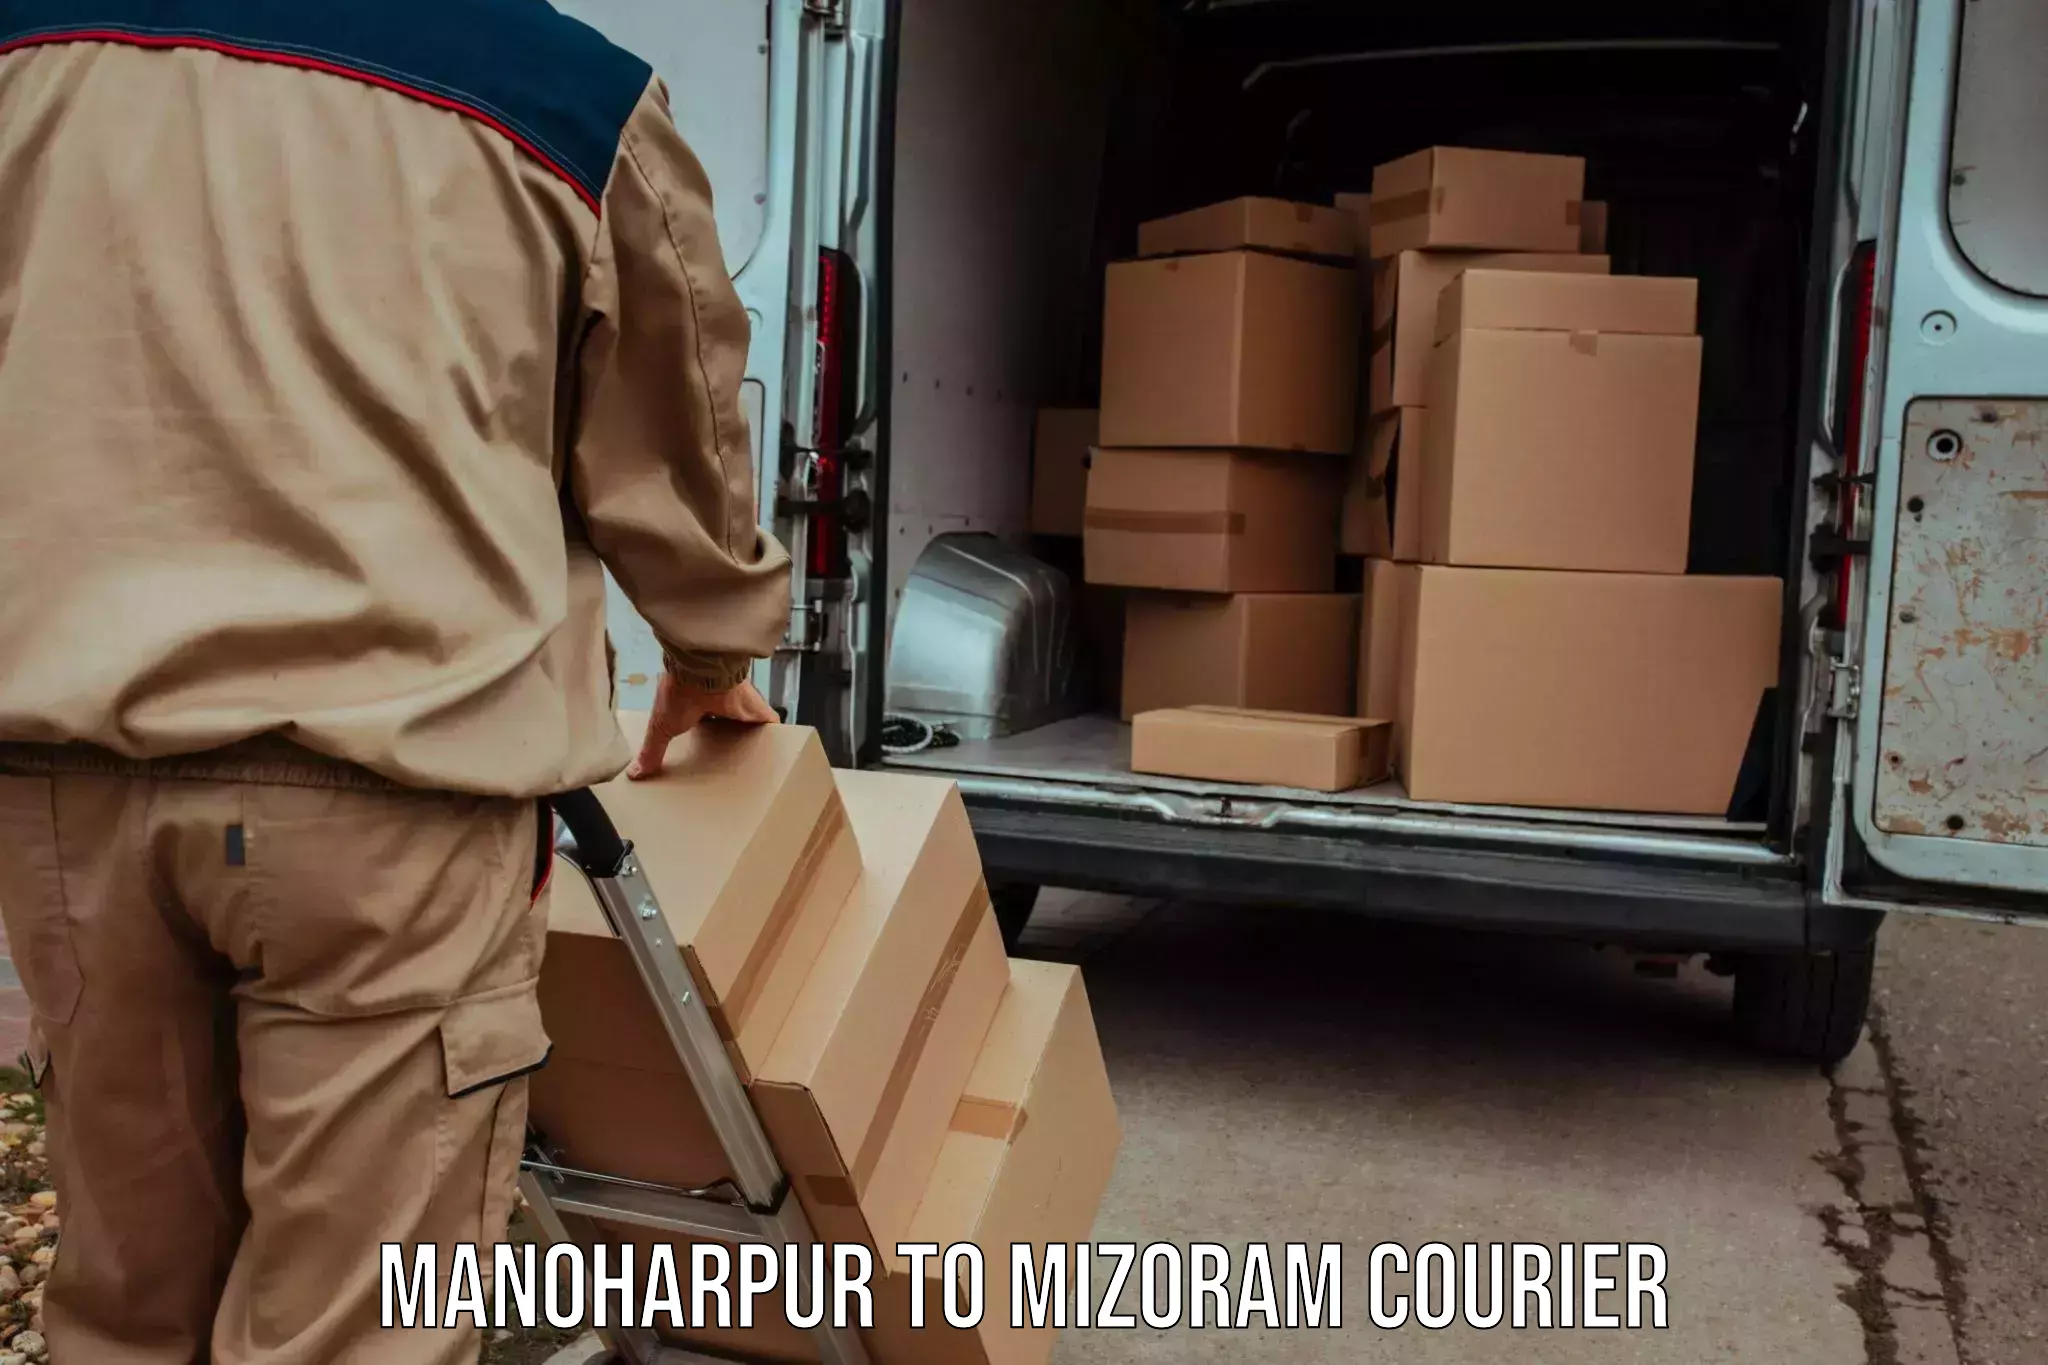 State-of-the-art courier technology Manoharpur to Mizoram